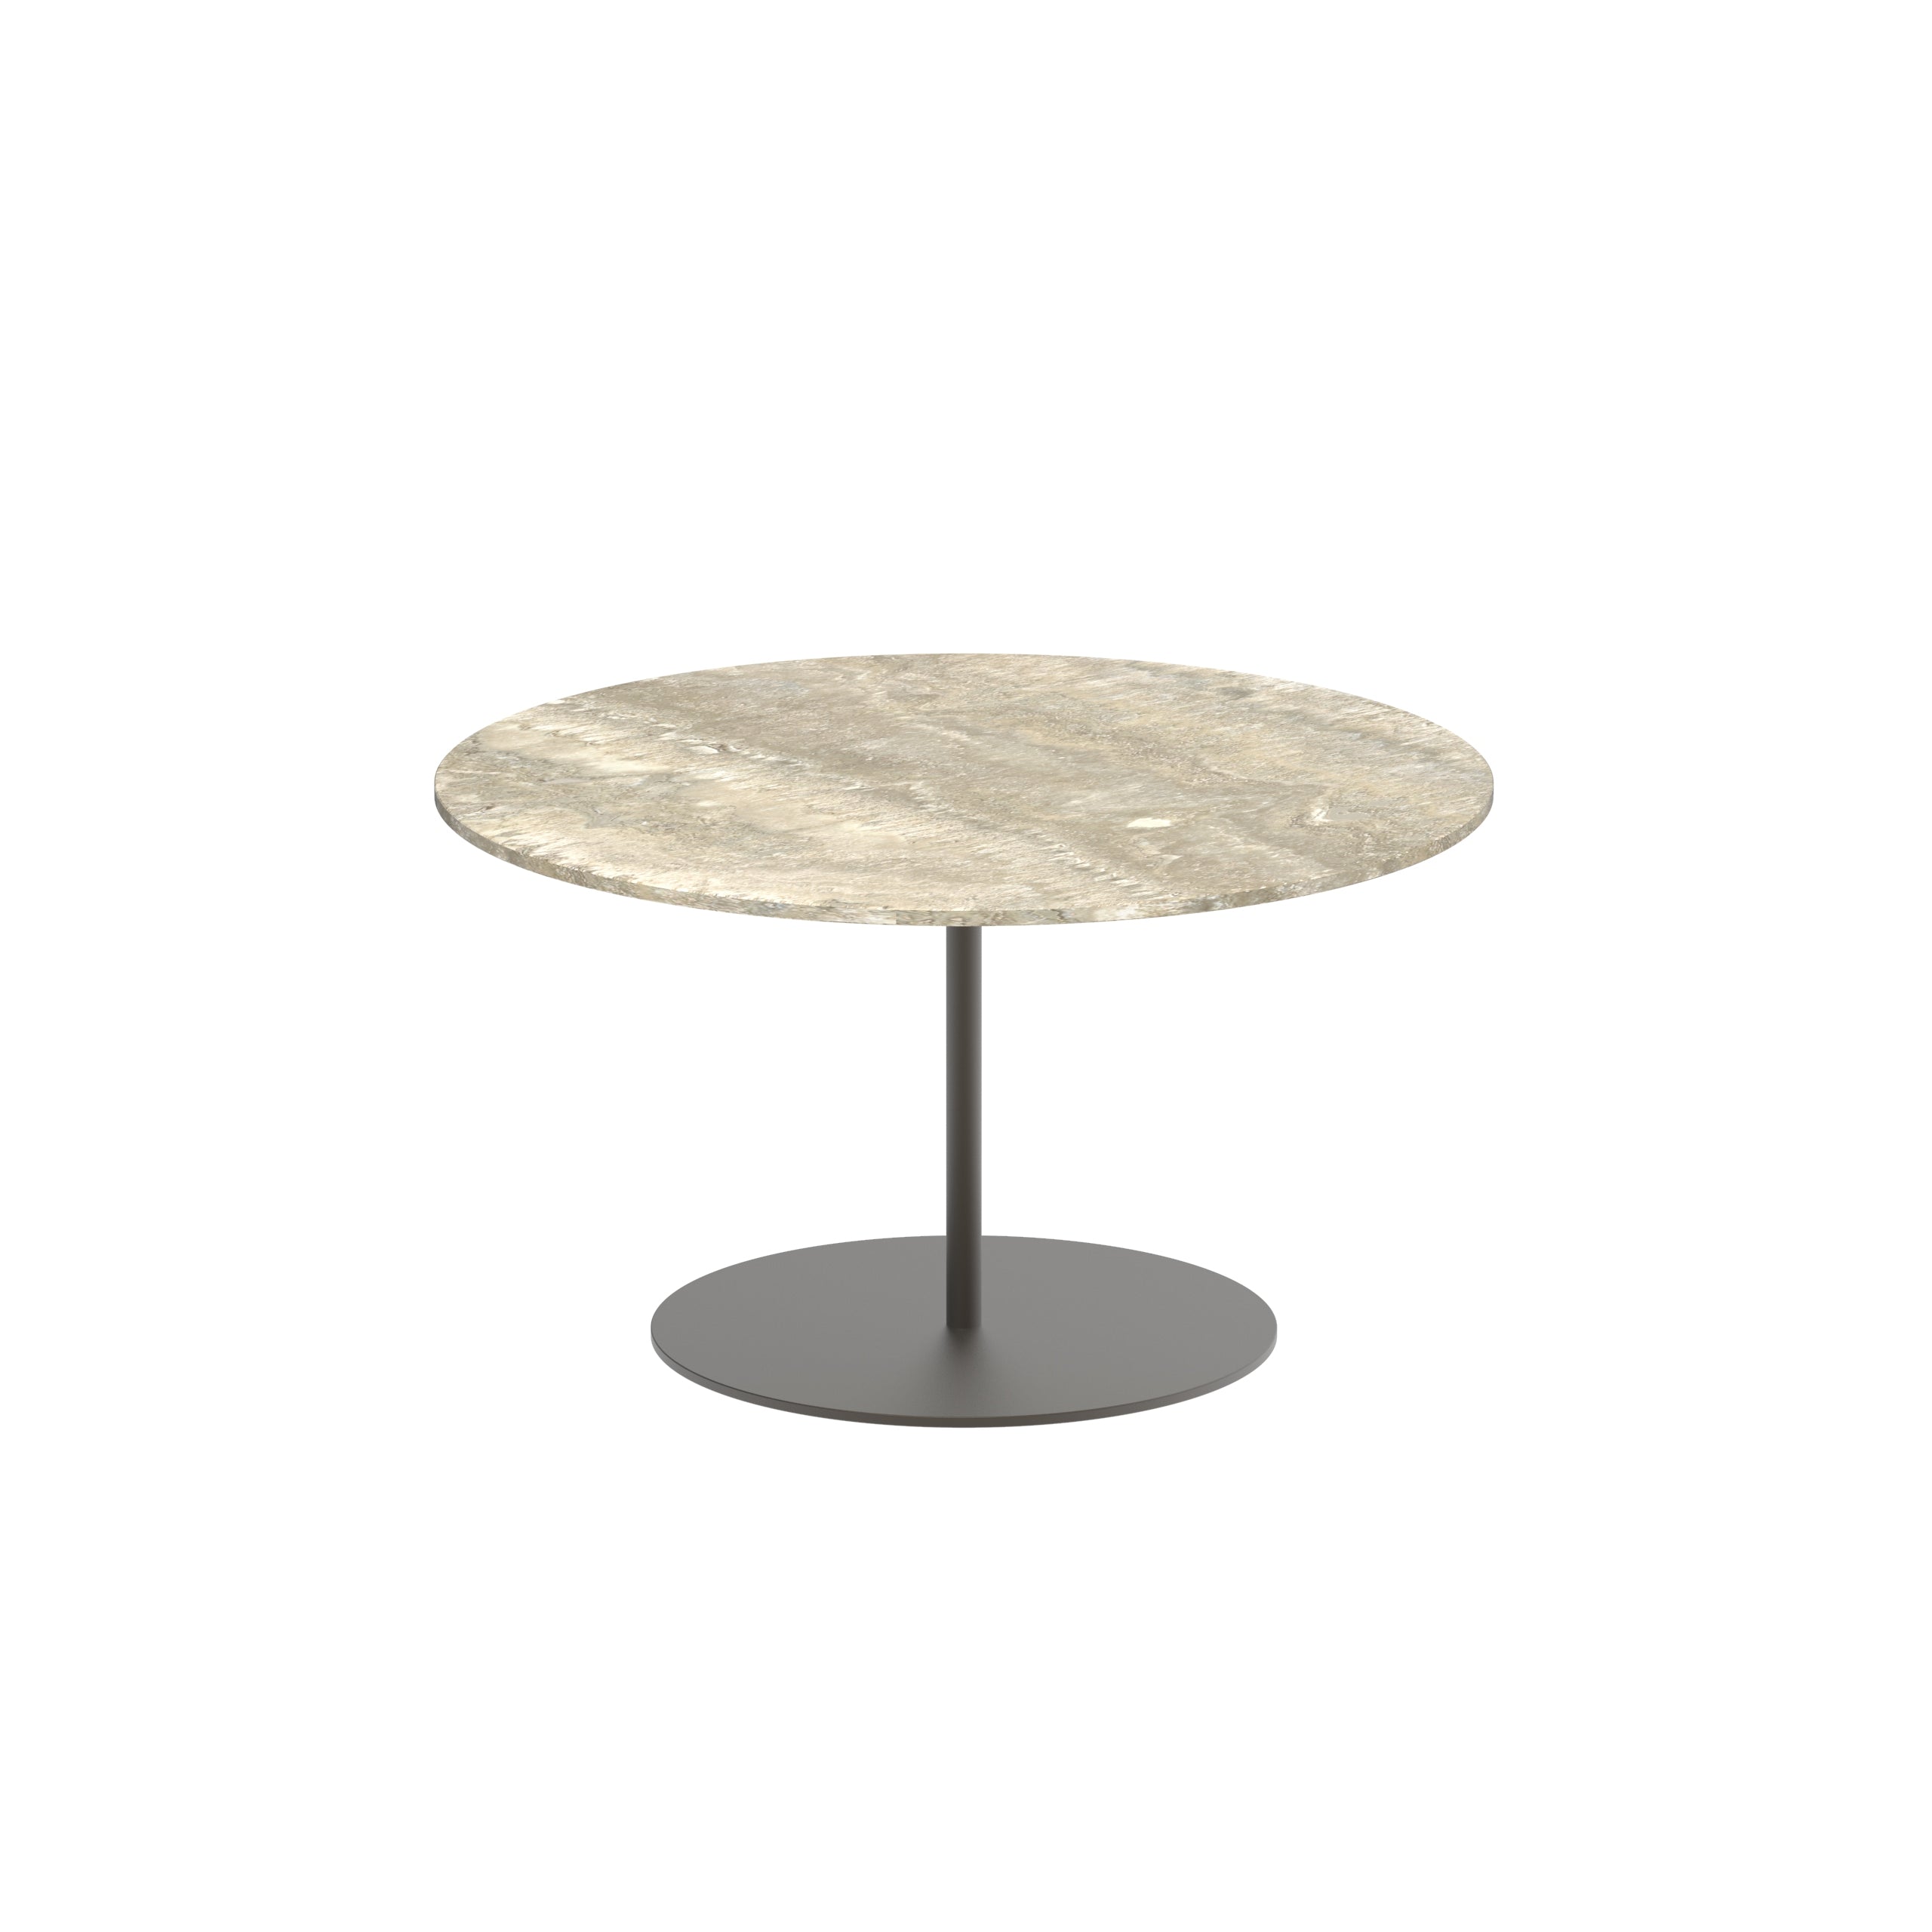 Table d'appoint BUTLER Ø75